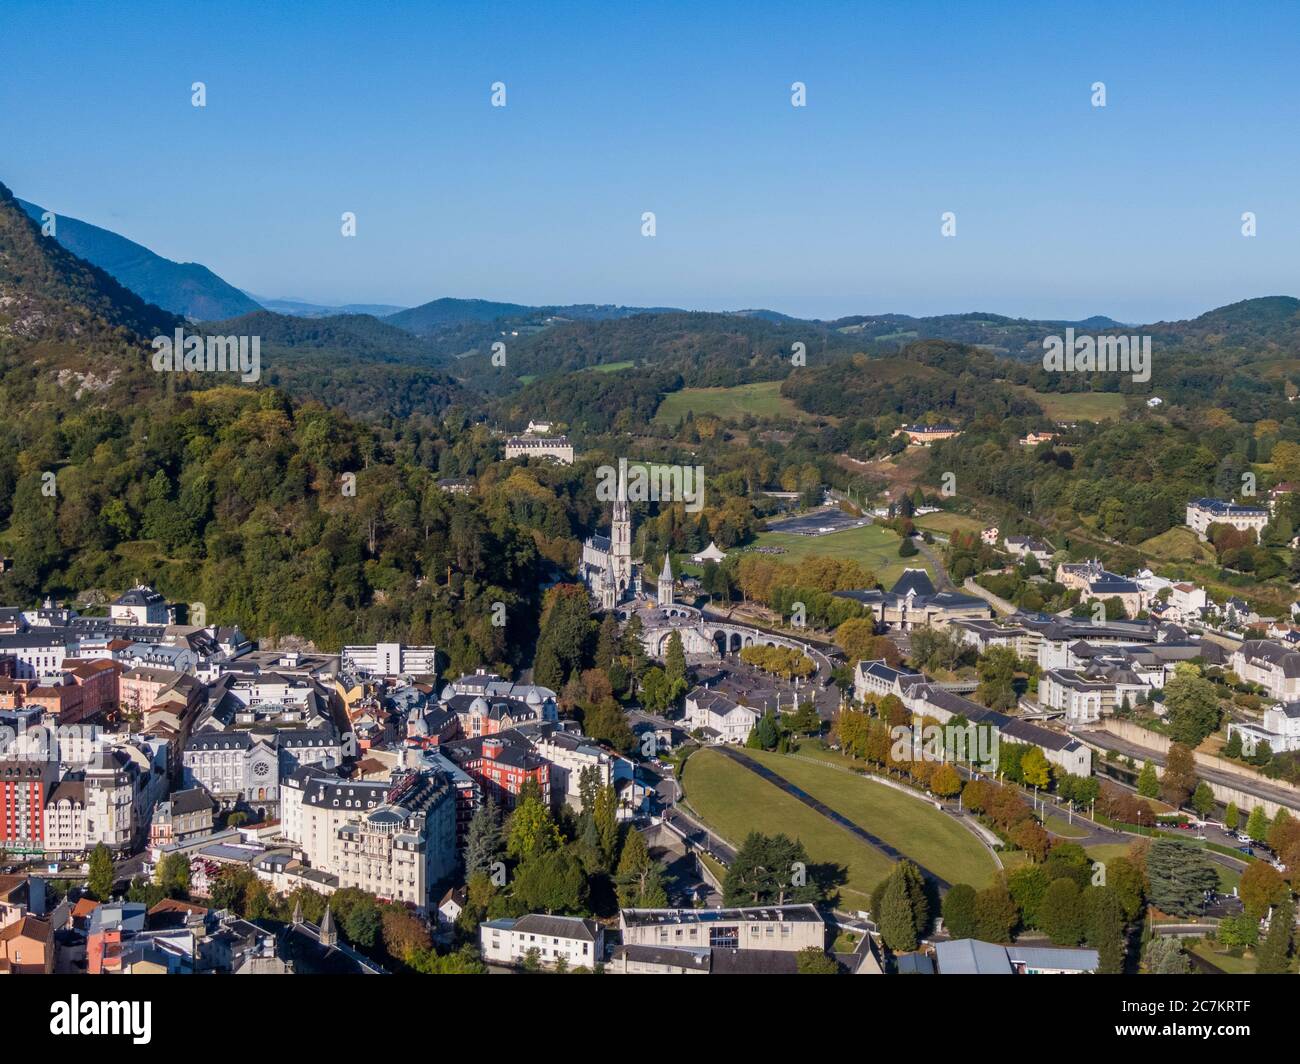 Aerial view of the Lourdes and Sanctuary of Our Lady, France Stock Photo